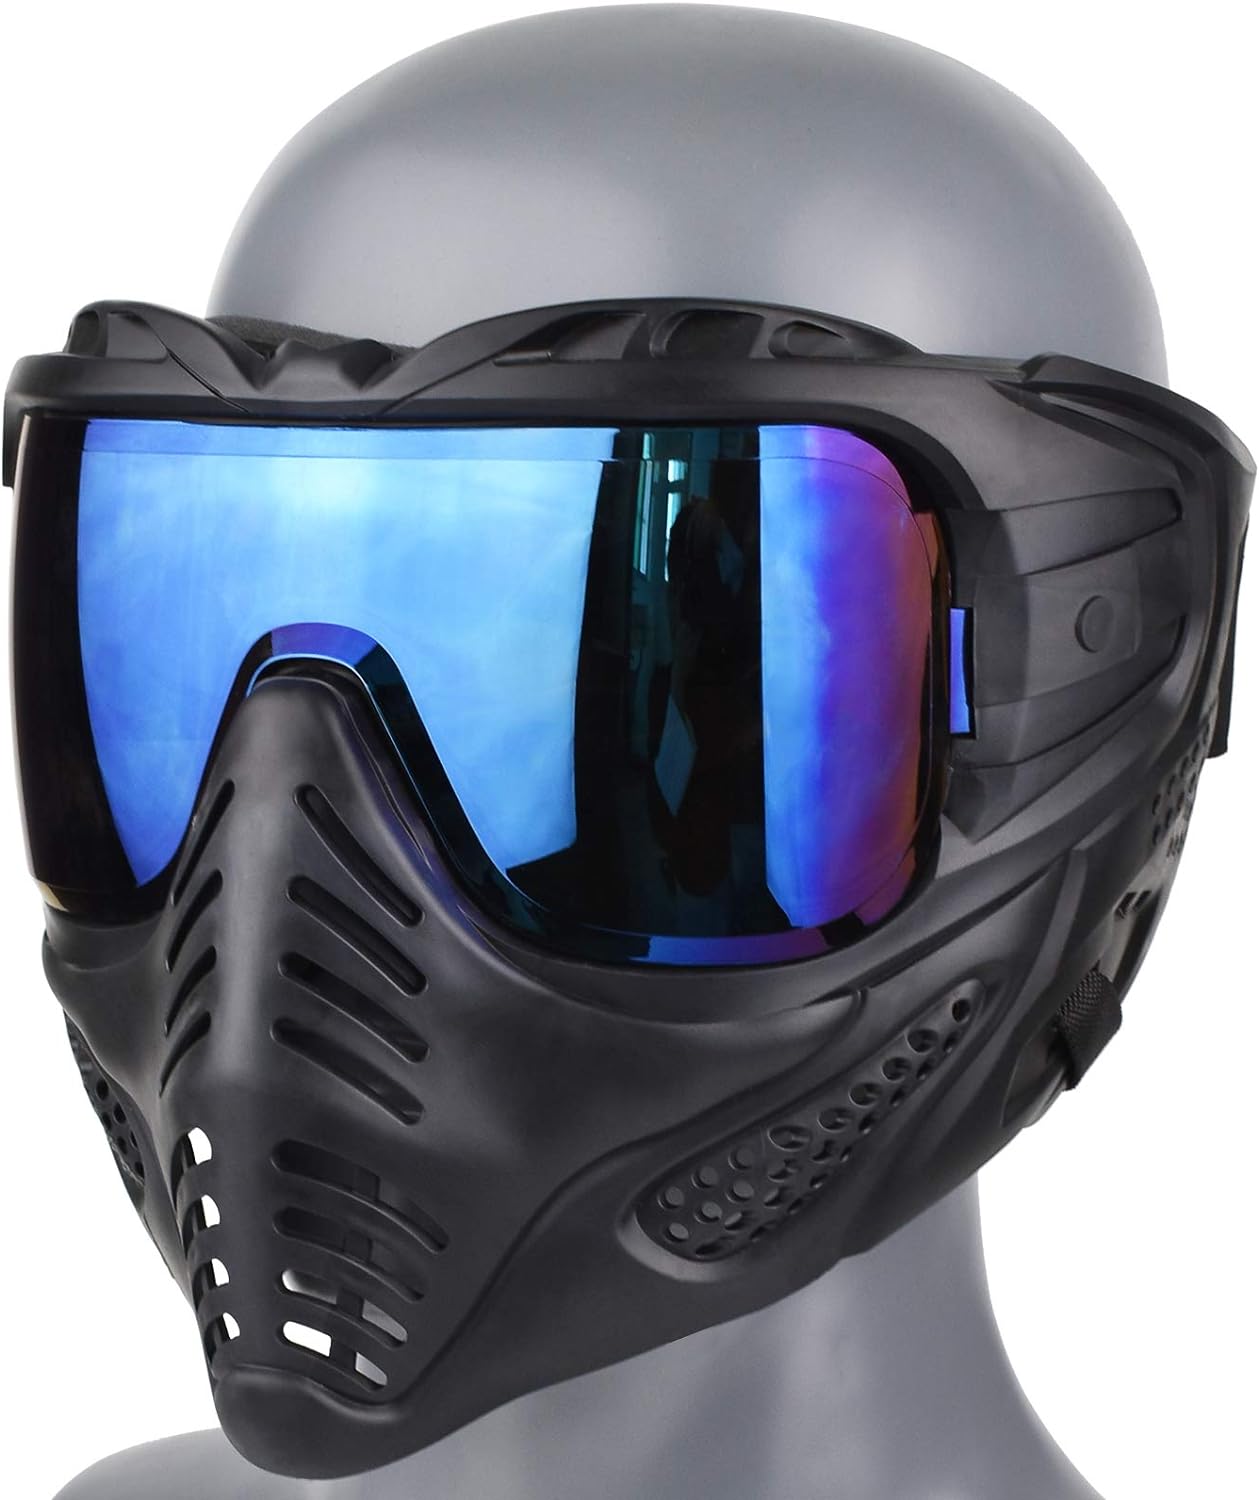 Paintball Mask Anti Fog, Full Face Tactical Mask Goggles